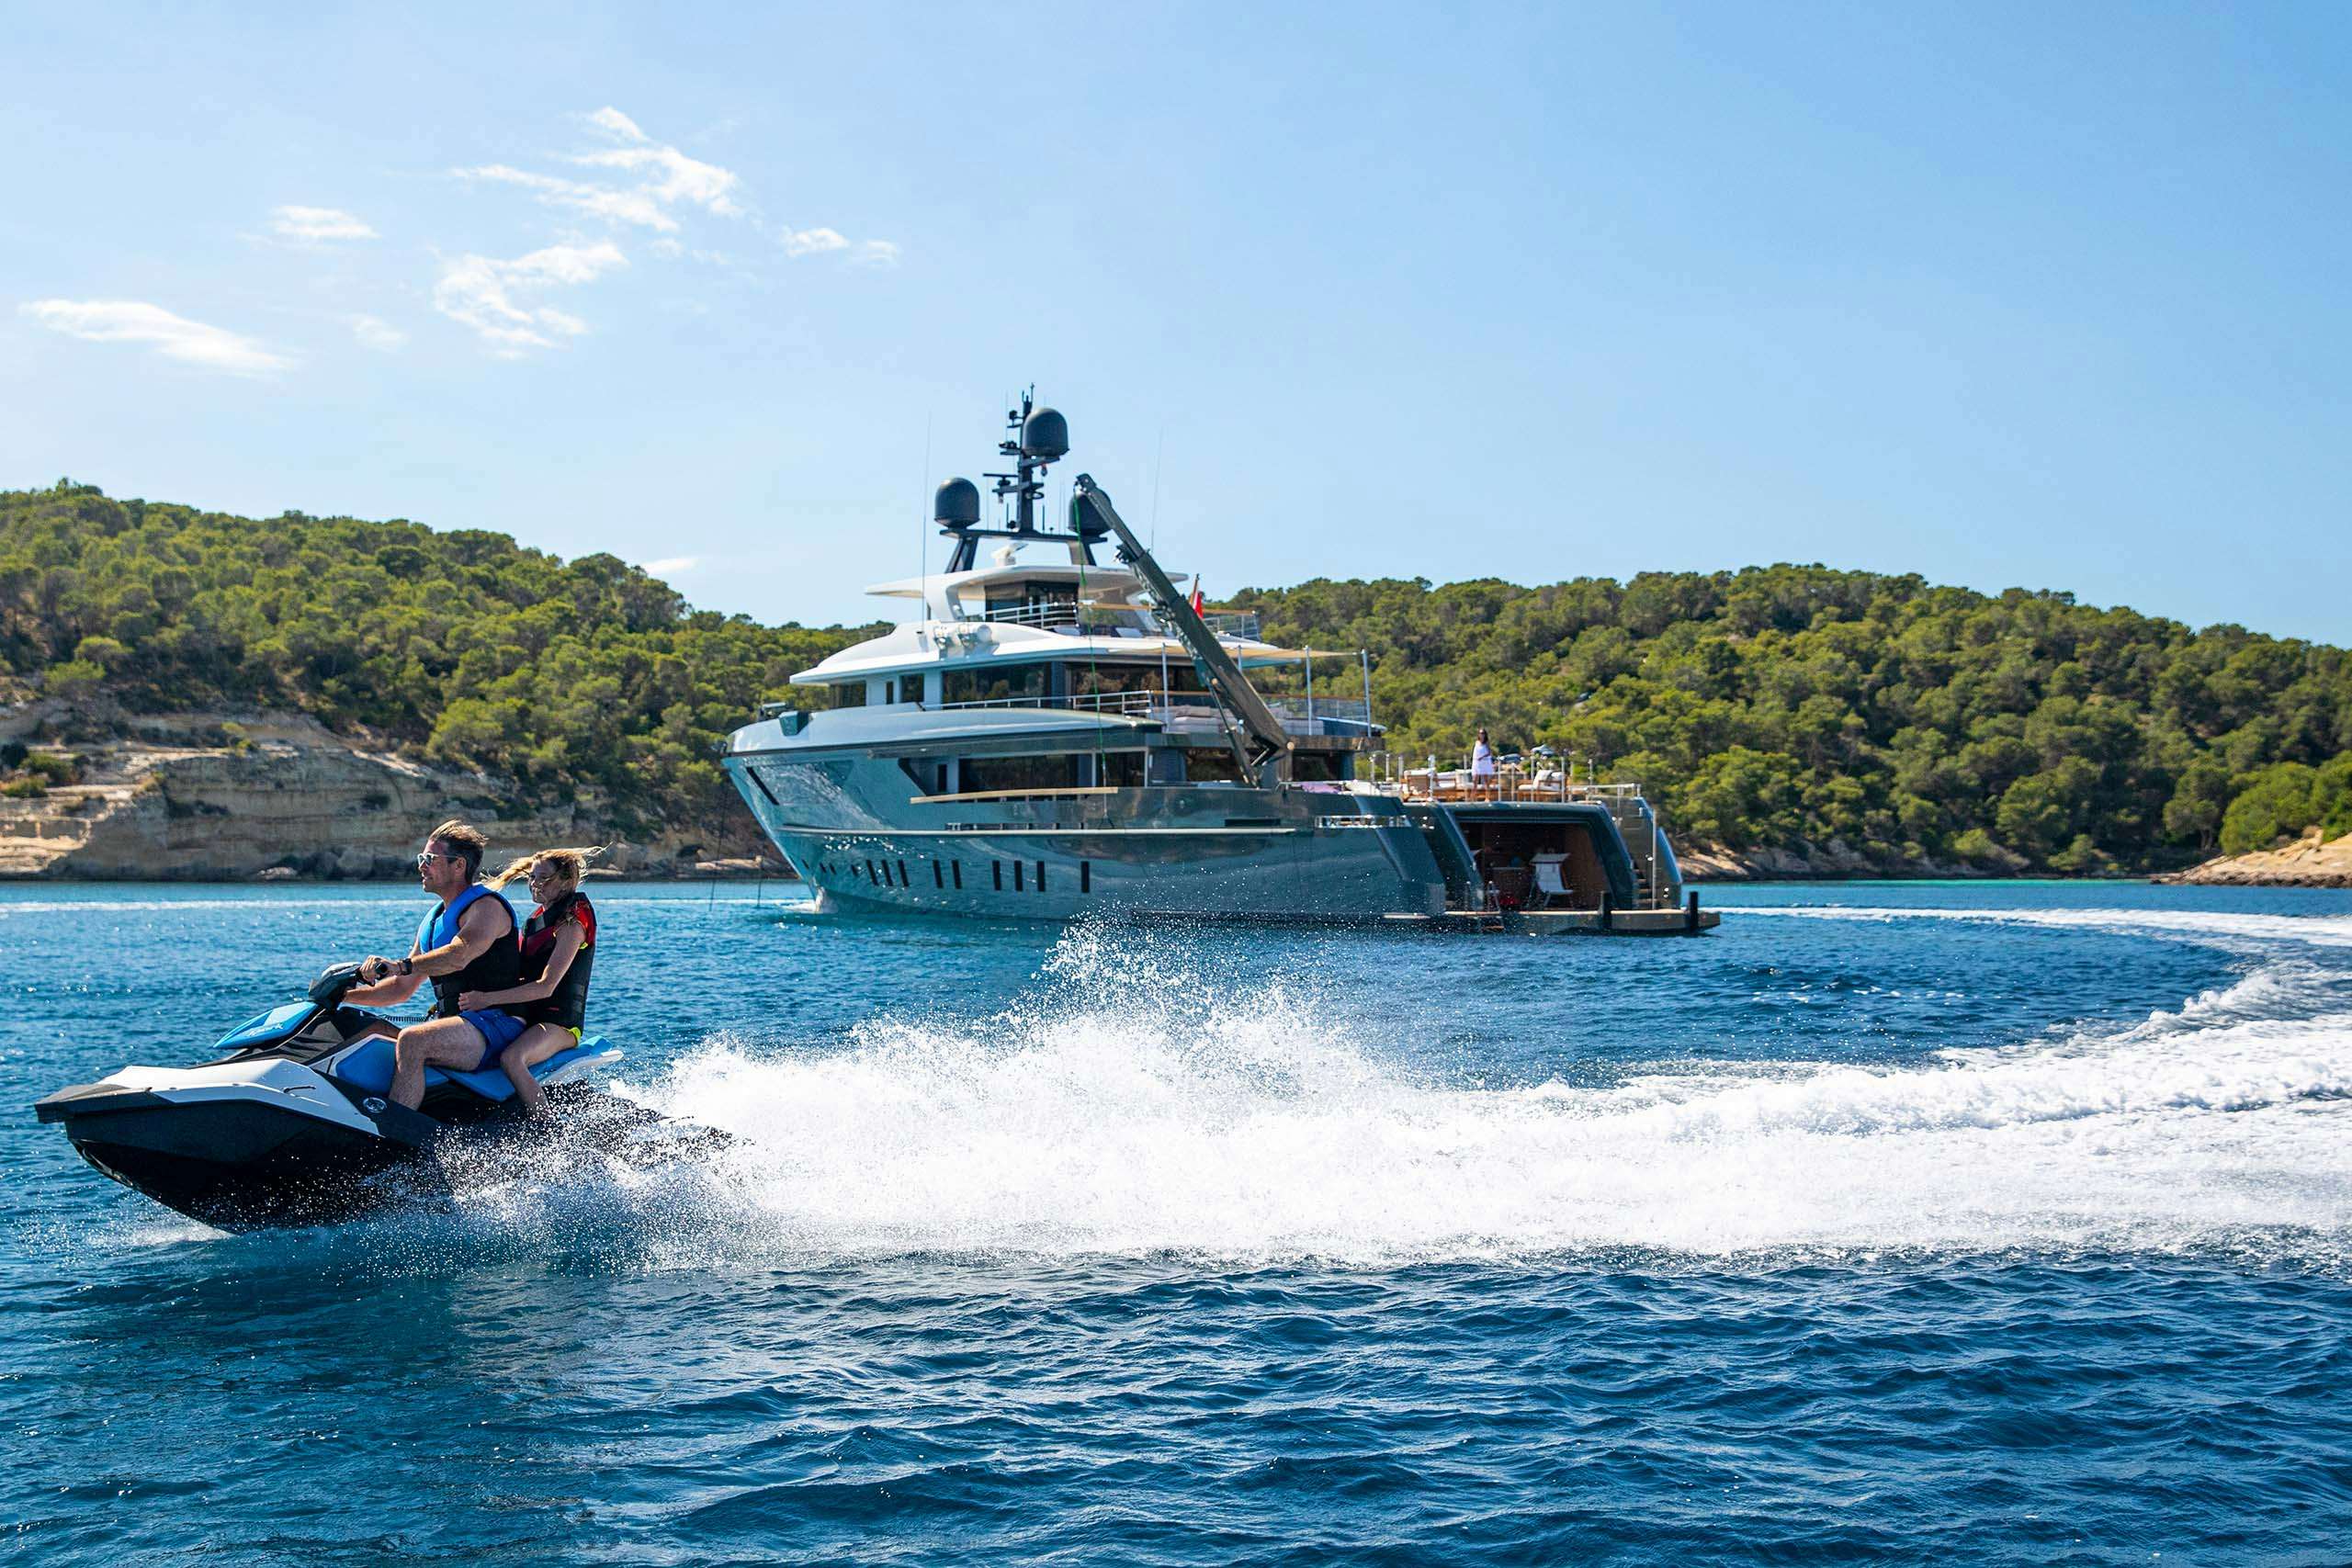 A couple enjoys jet skiing in front of a luxurious yacht anchored near a lush island, showcasing the exciting activities available during a yacht charter.